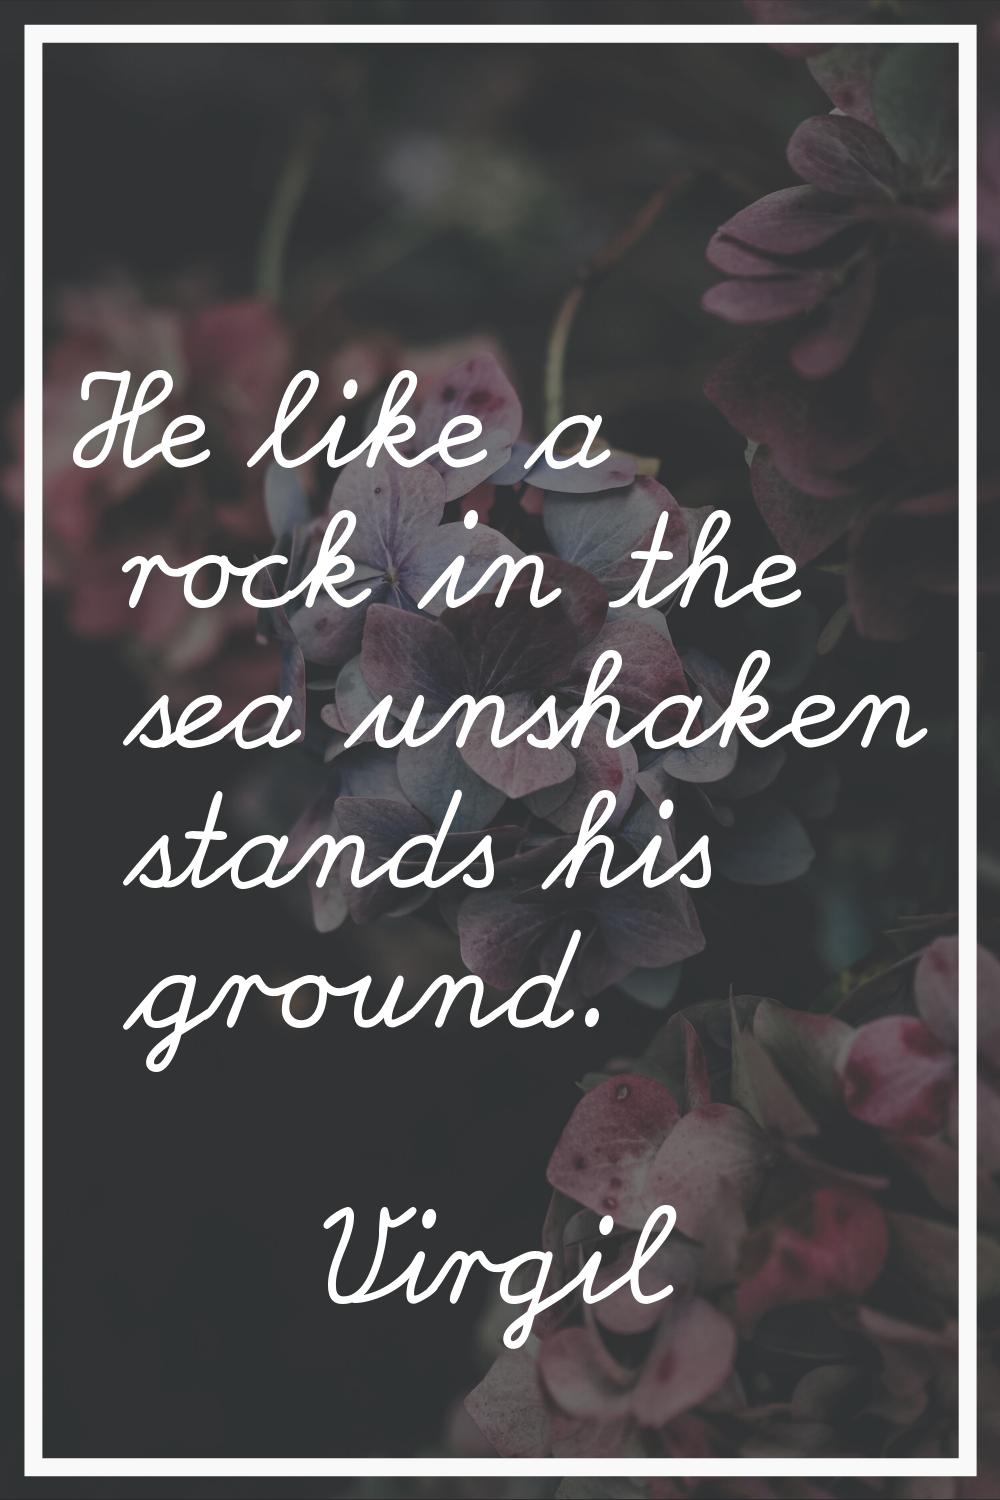 He like a rock in the sea unshaken stands his ground.